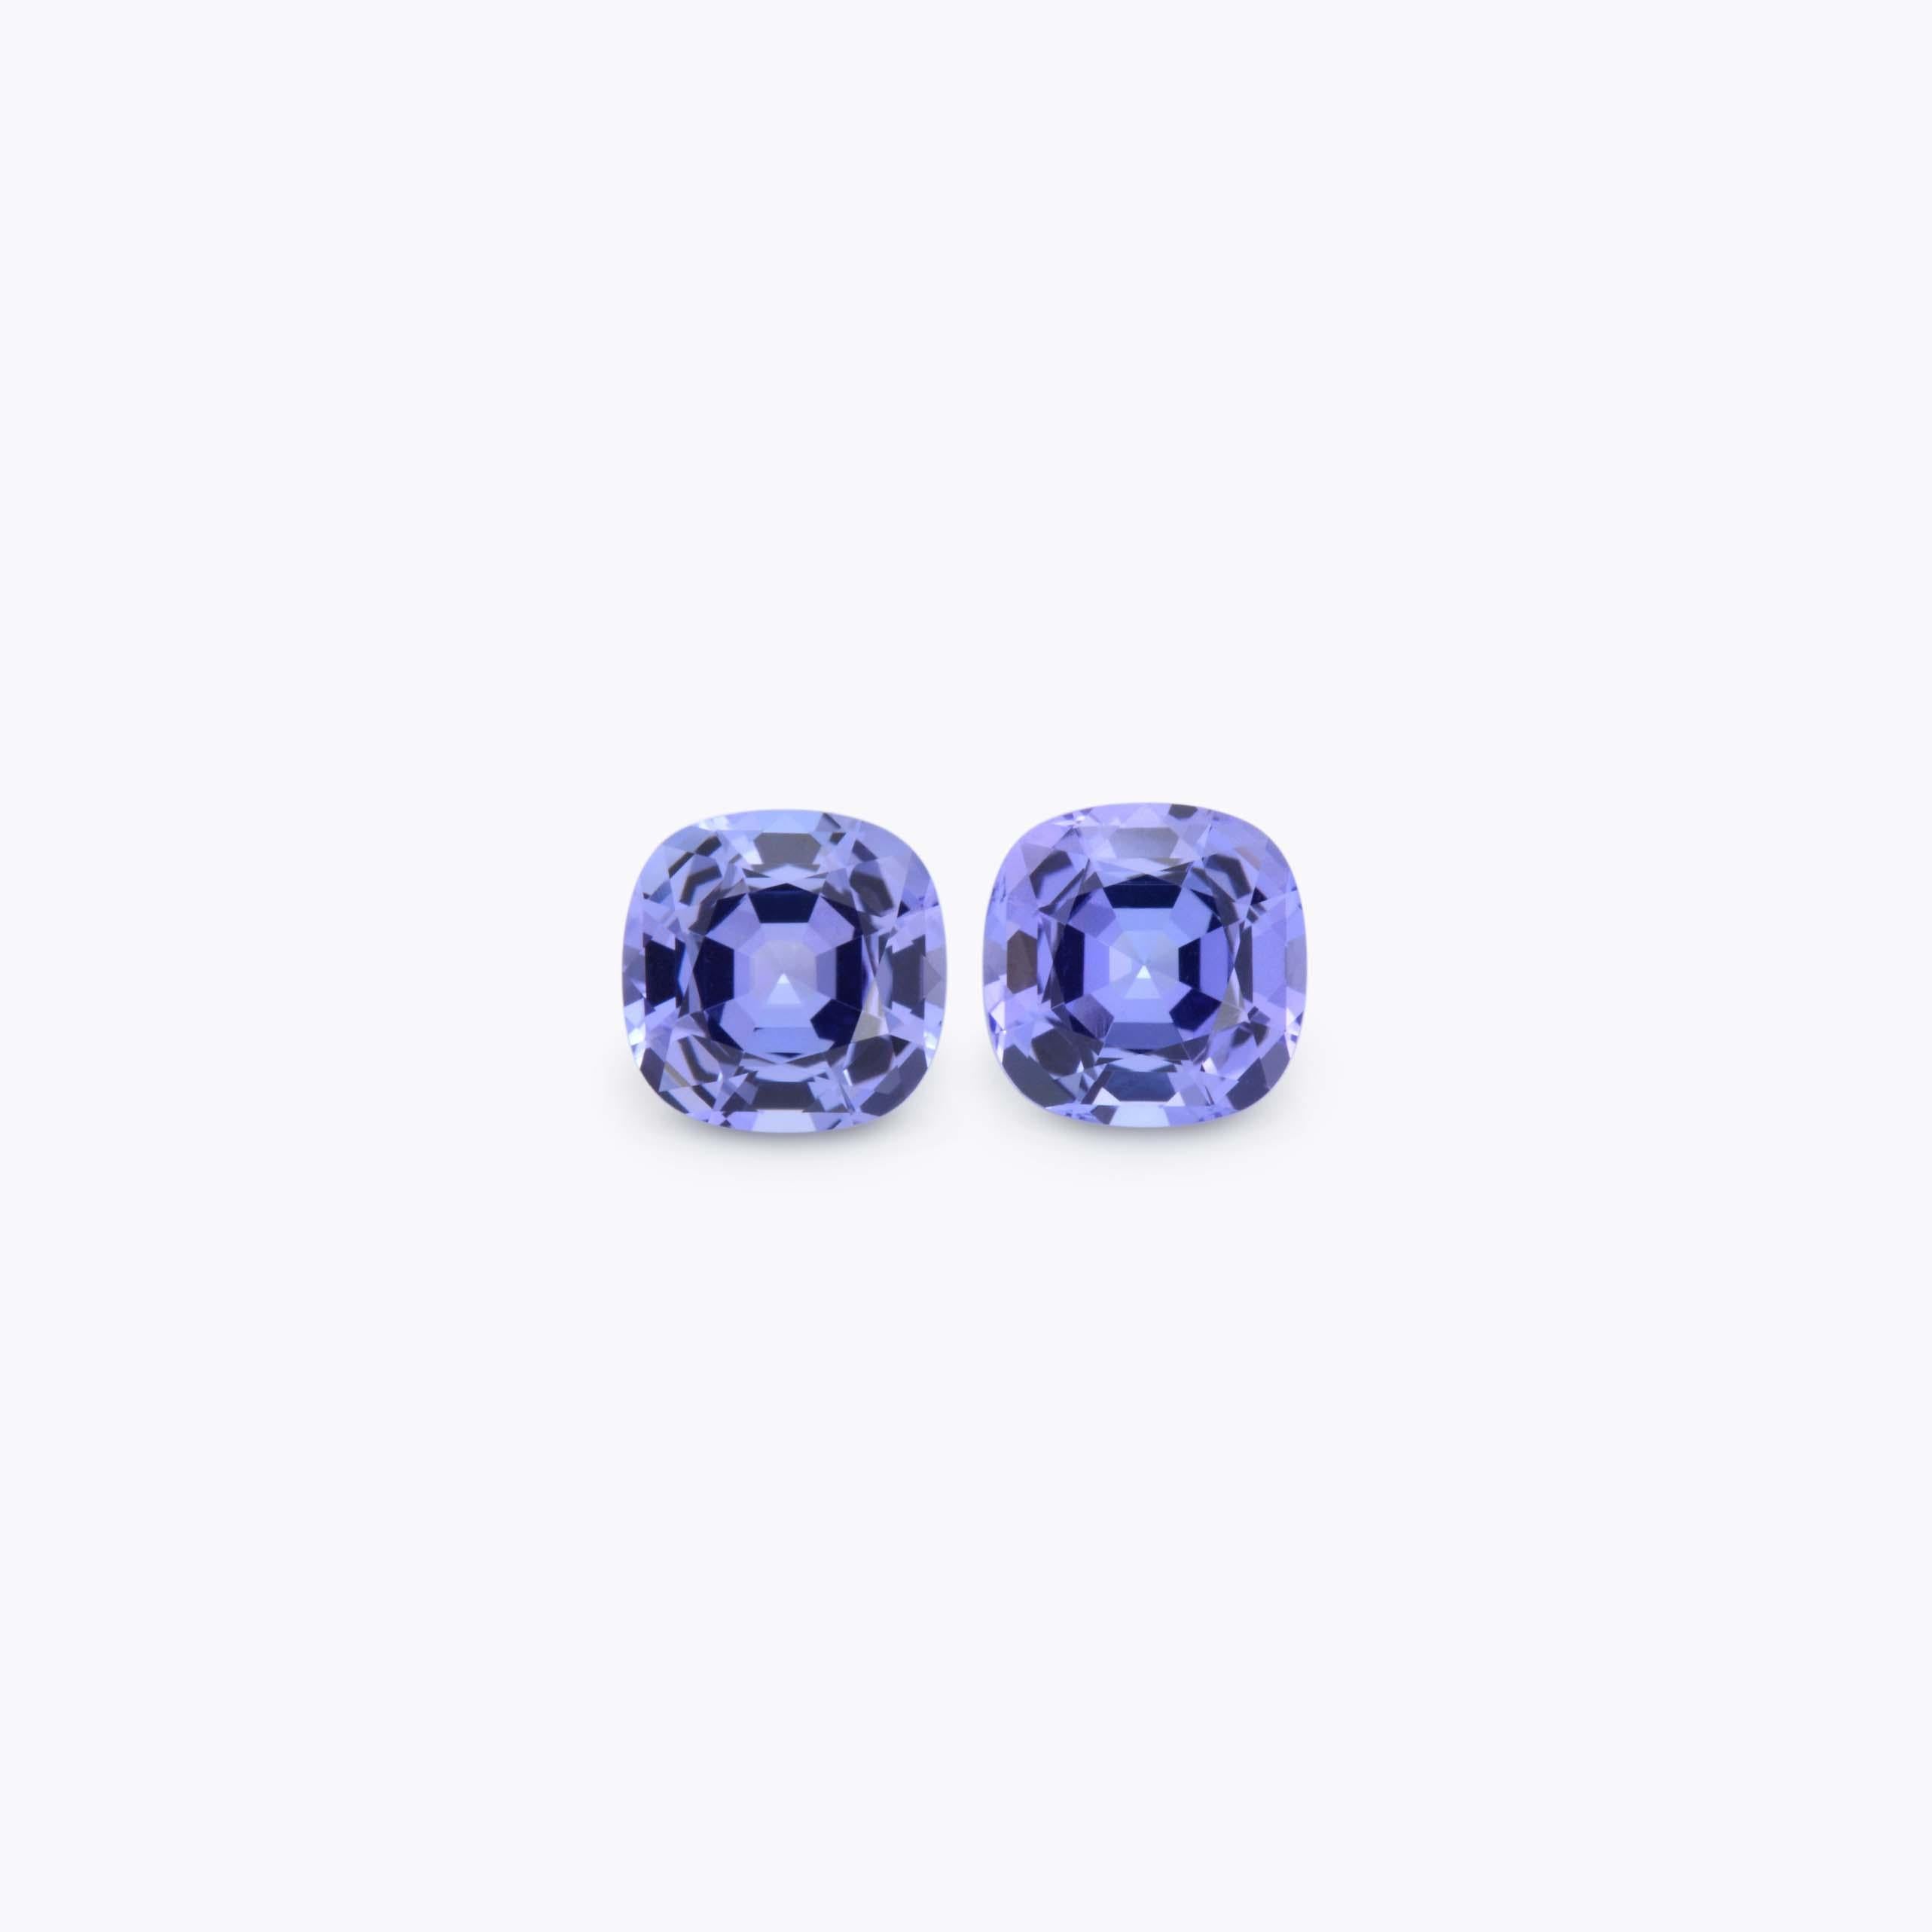 Contemporary Tanzanite Earrings Loose Gemstones 4.04 Carats Unmounted Cushion For Sale